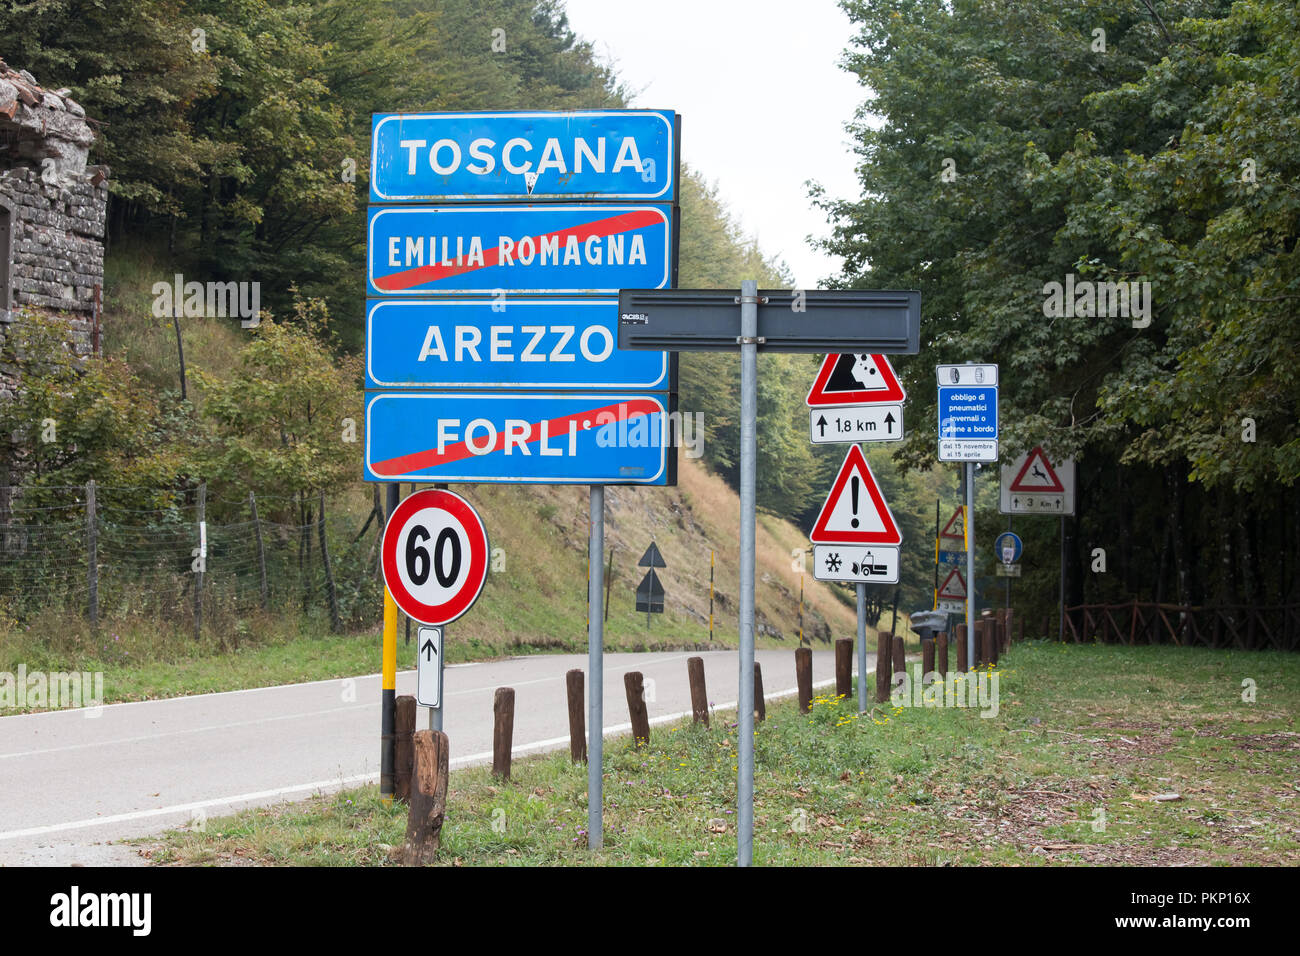 Road signs at the entrance to Tuscany and Arezzo, Italy Stock Photo - Alamy